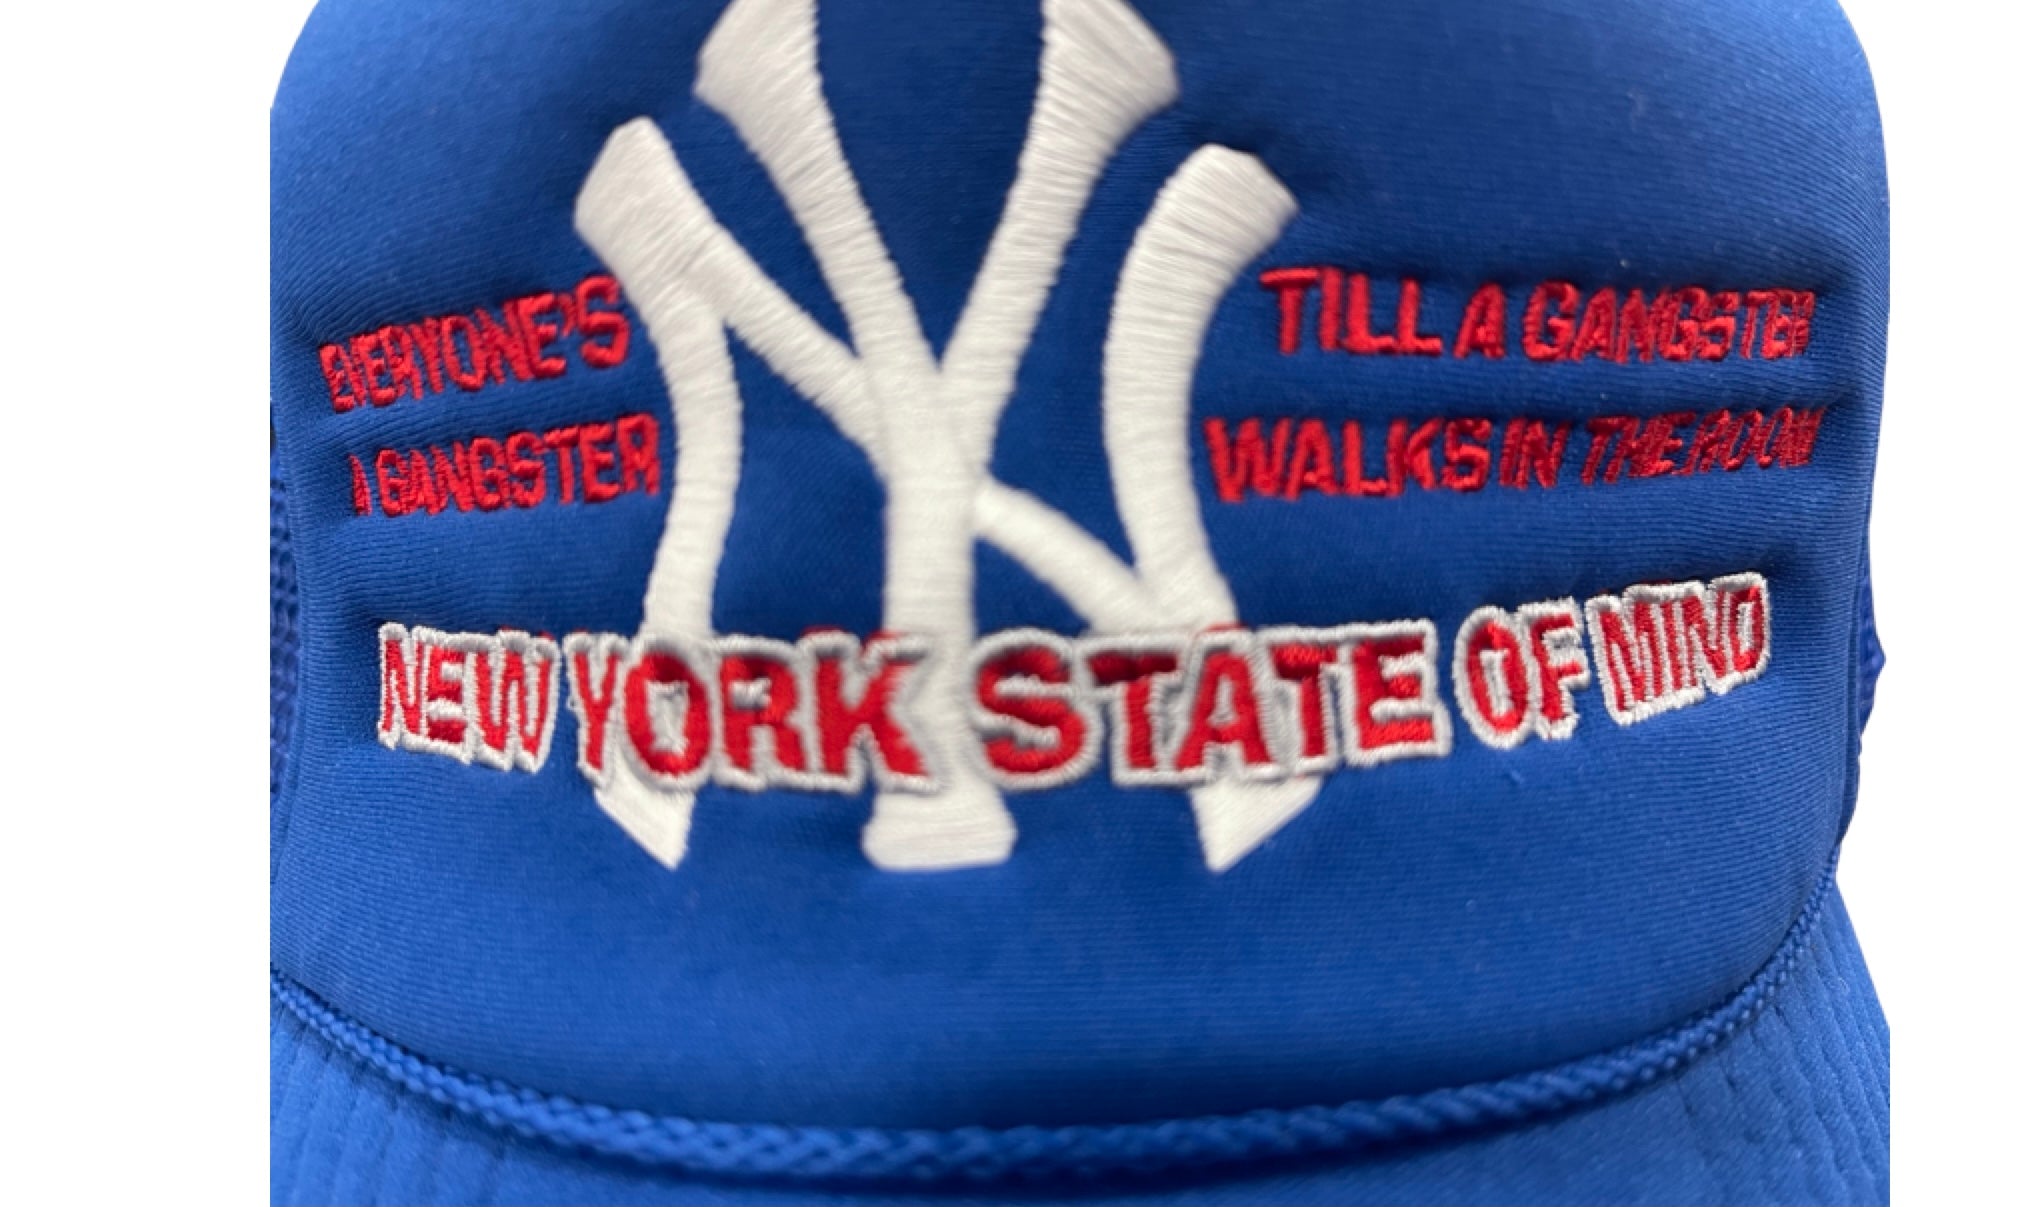 New York State Of Mind (Royal Blue) Trucker Hat